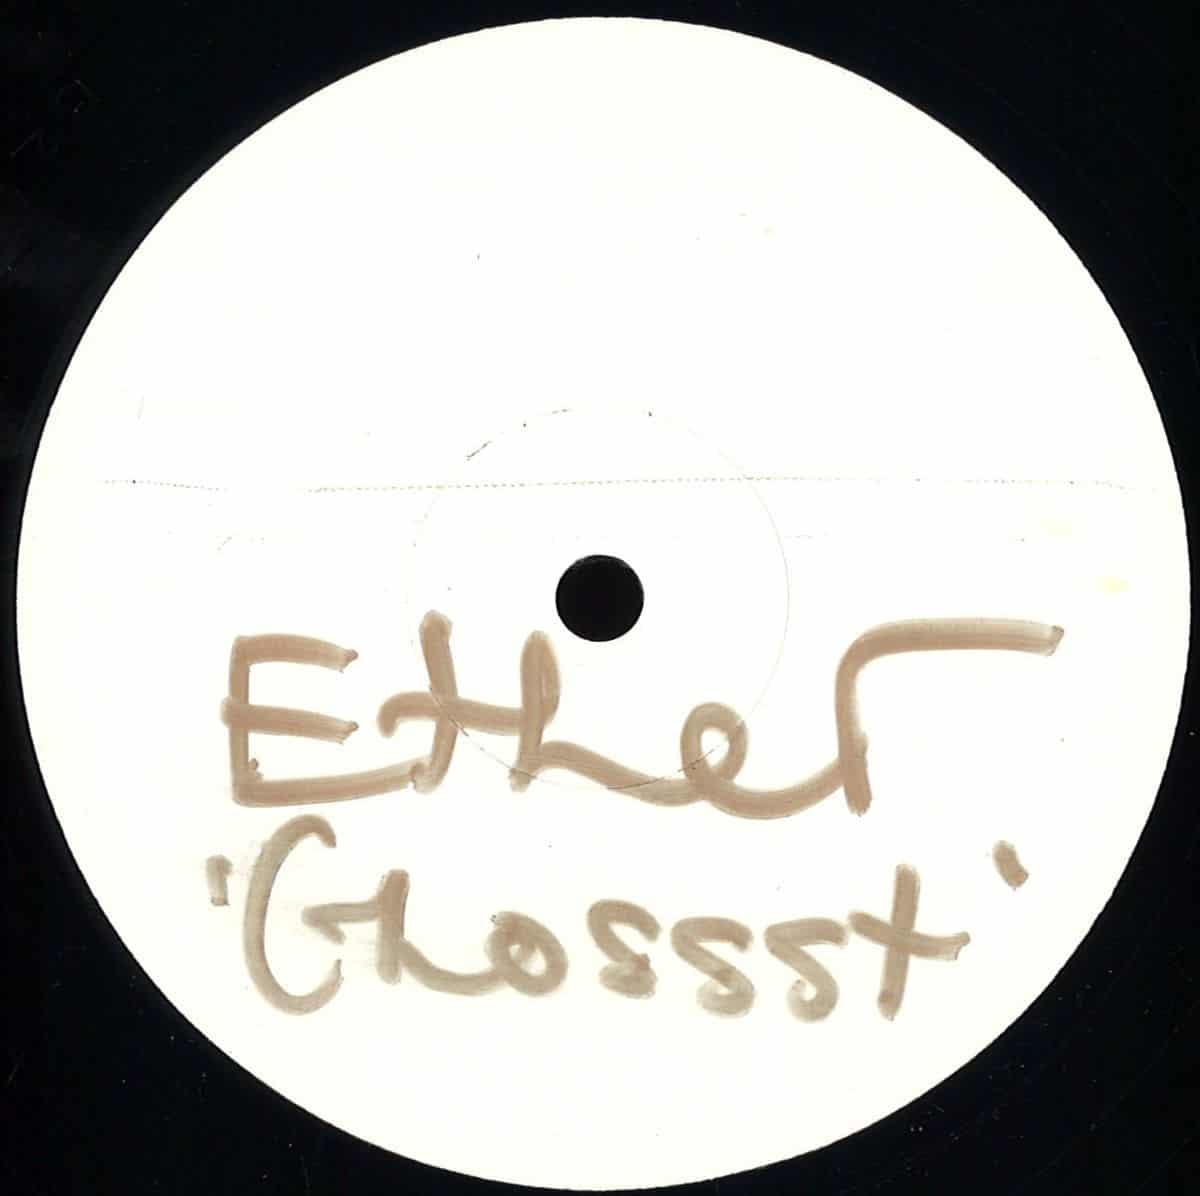 Ether|Jackson - Bloom // Ghossst - WRDUBS05 - WELL ROUNDED DUBS